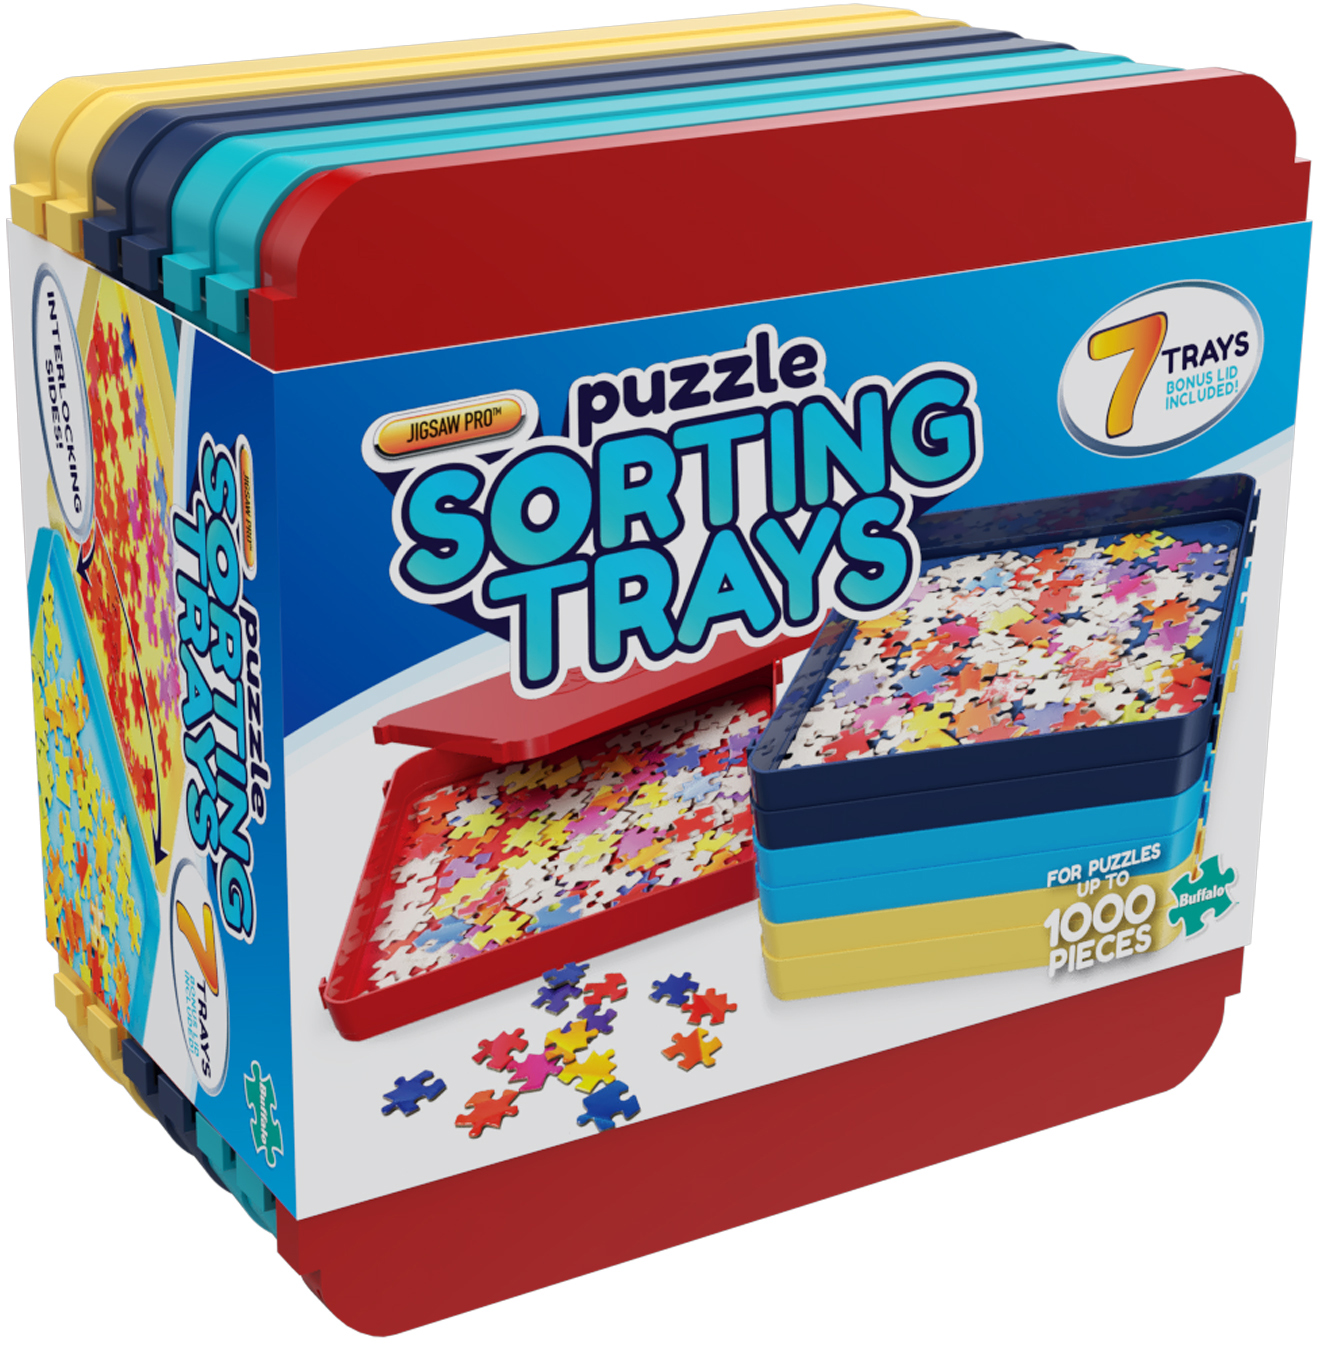 BEST Puzzle Sorting Trays - Scratch and Dent